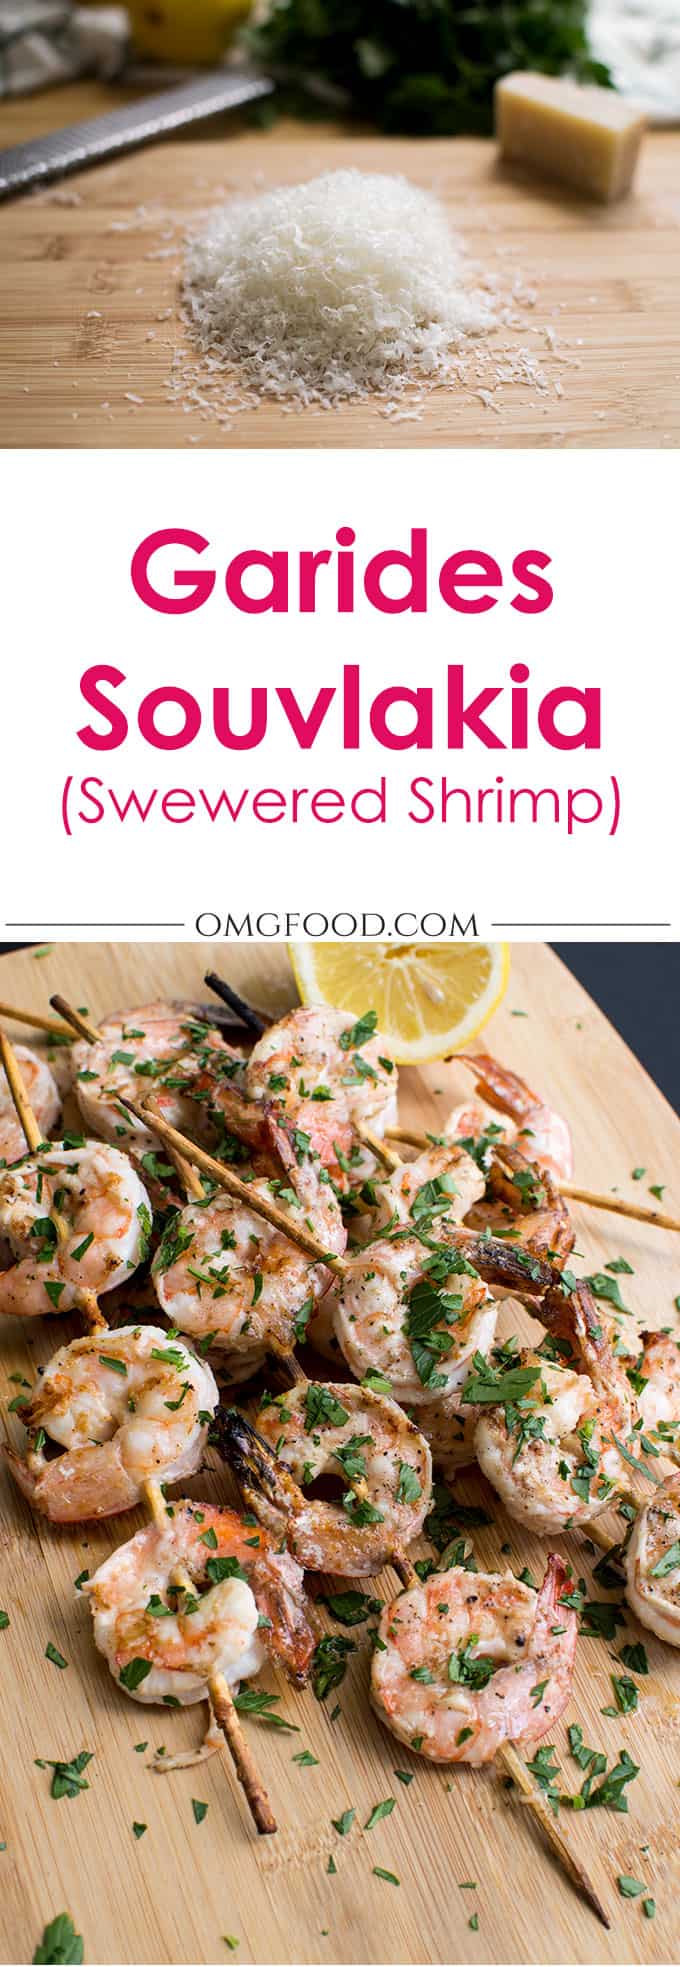 Garides Souvlakia - Greek swewered shrimp made with lemon, olive oil, and grated kefalotiri cheese. Grill or broil it!| omgfood.com